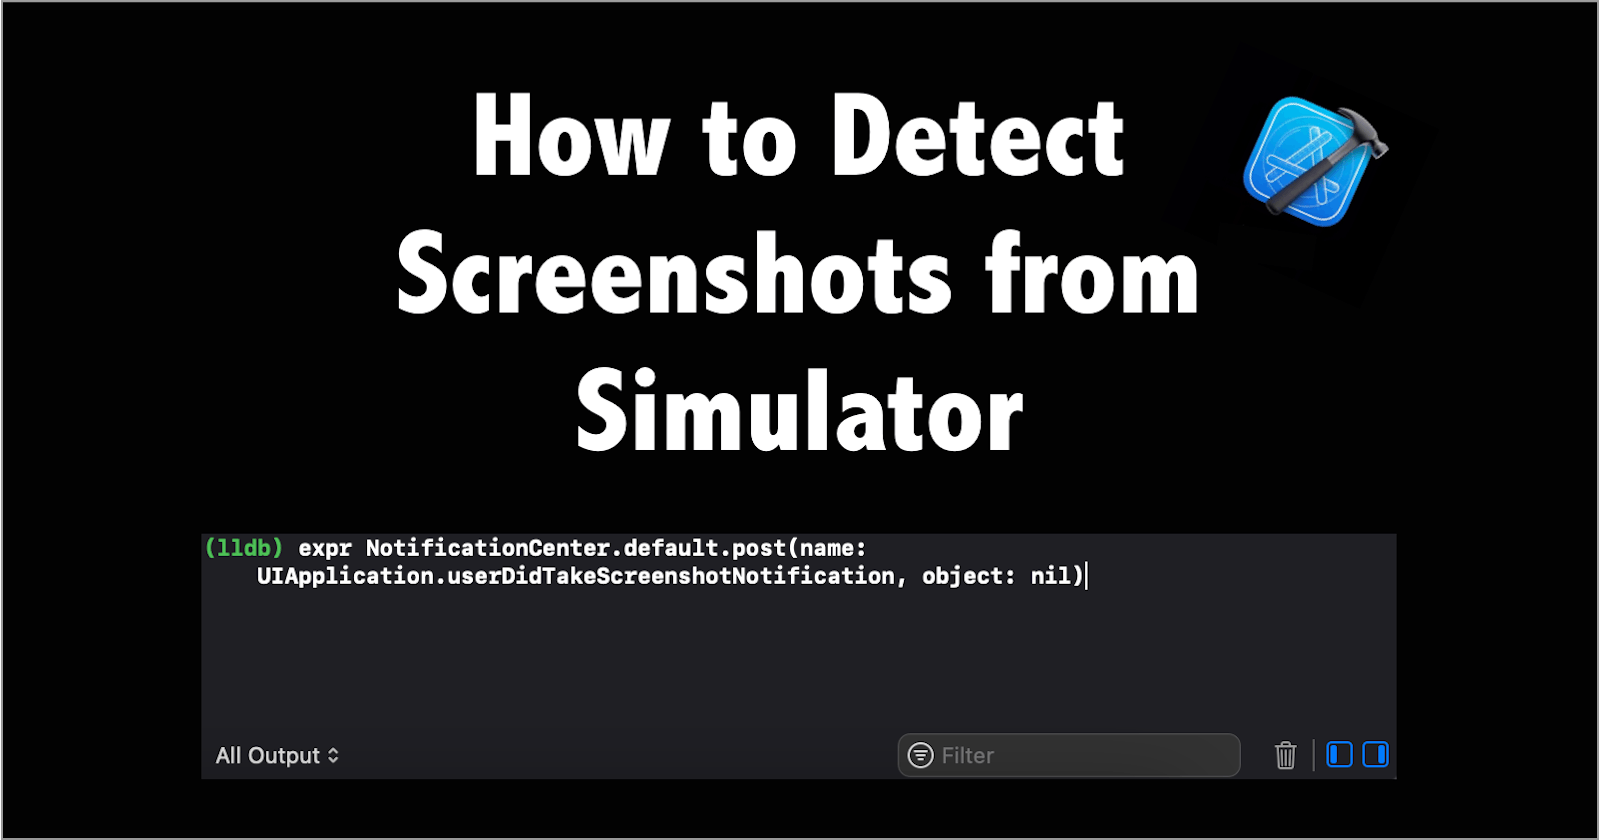 How to detect a screenshot from Simulator